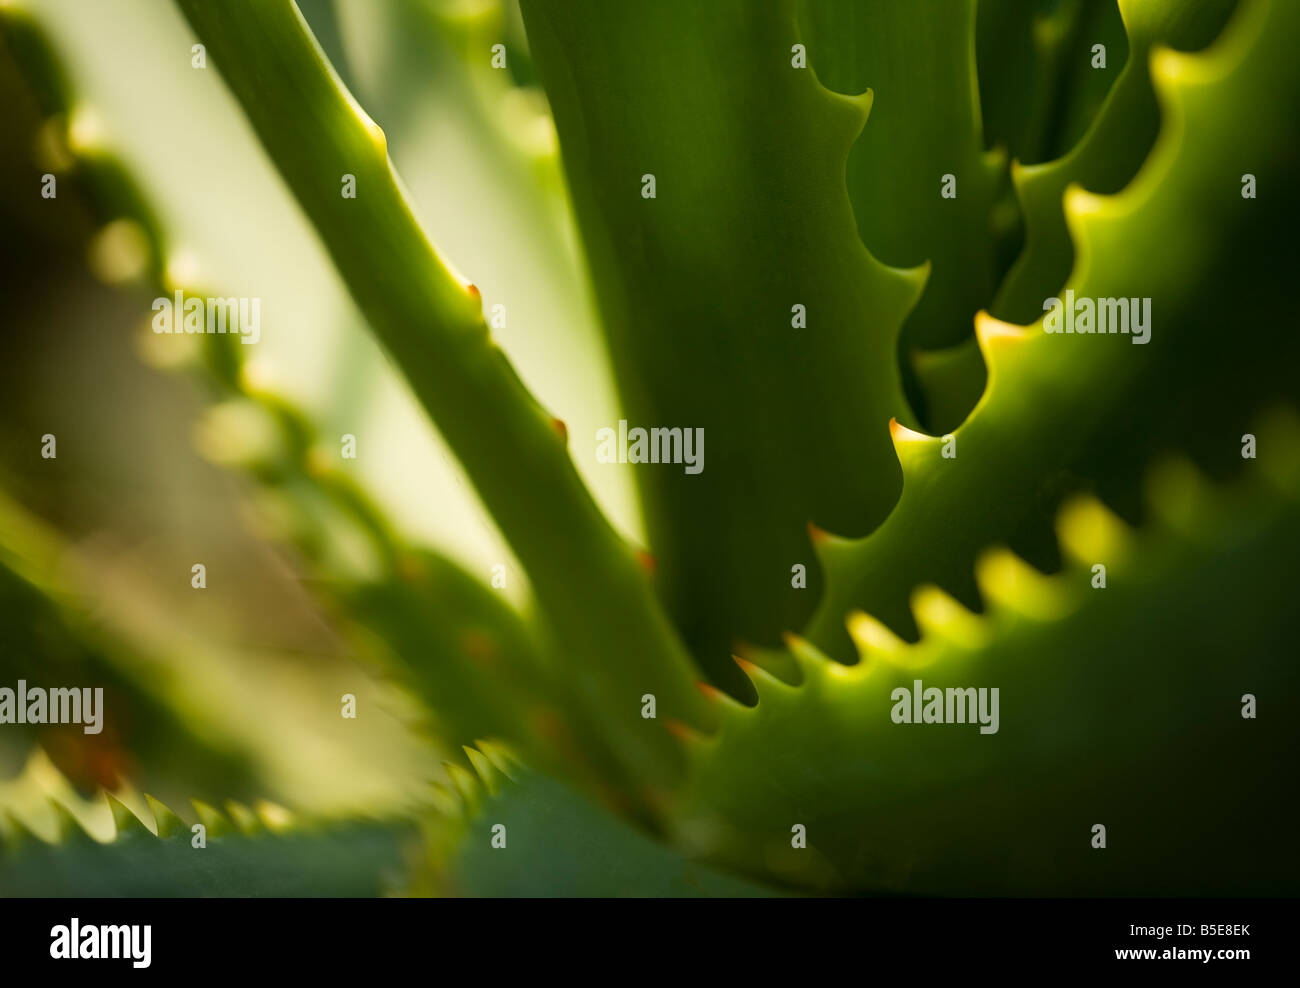 Semi abstract image of a green plant Stock Photo